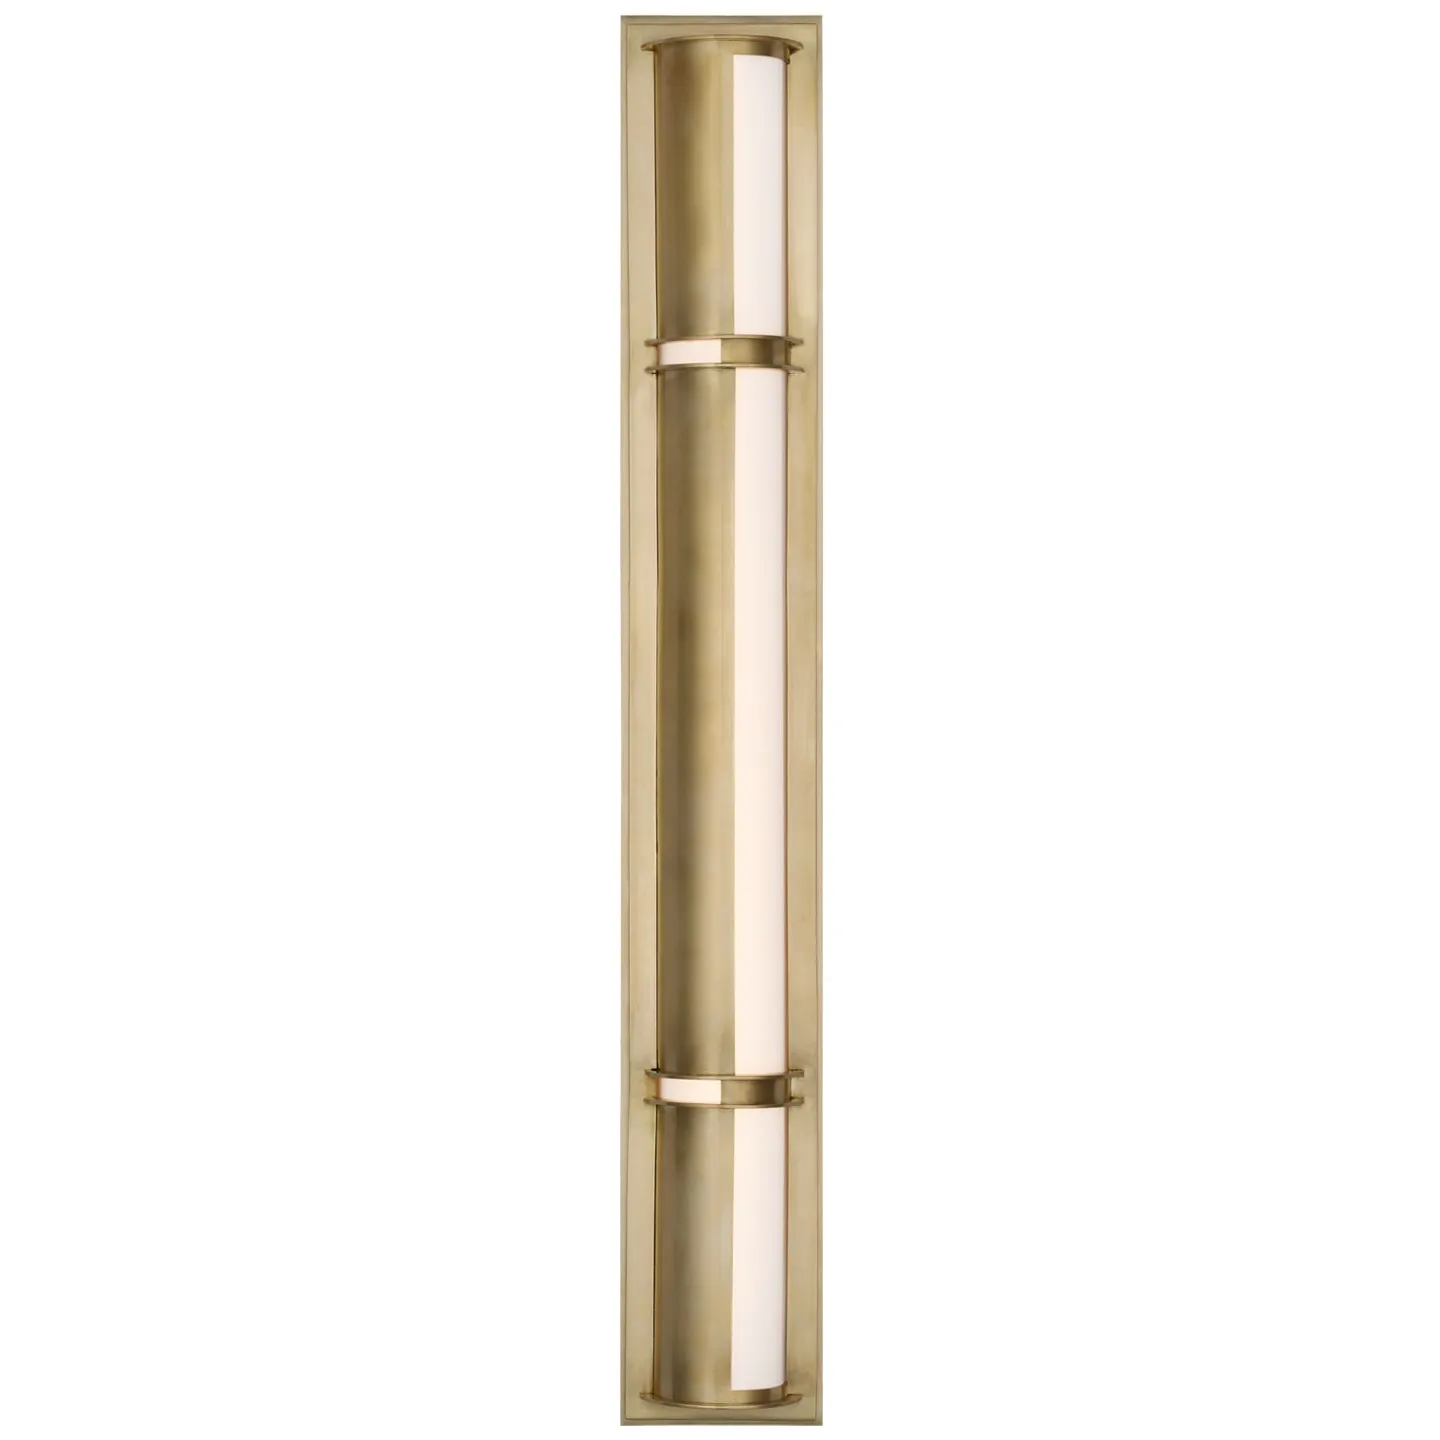 Strever 32" Shielded Bath Light in Natural Brass with White Glass